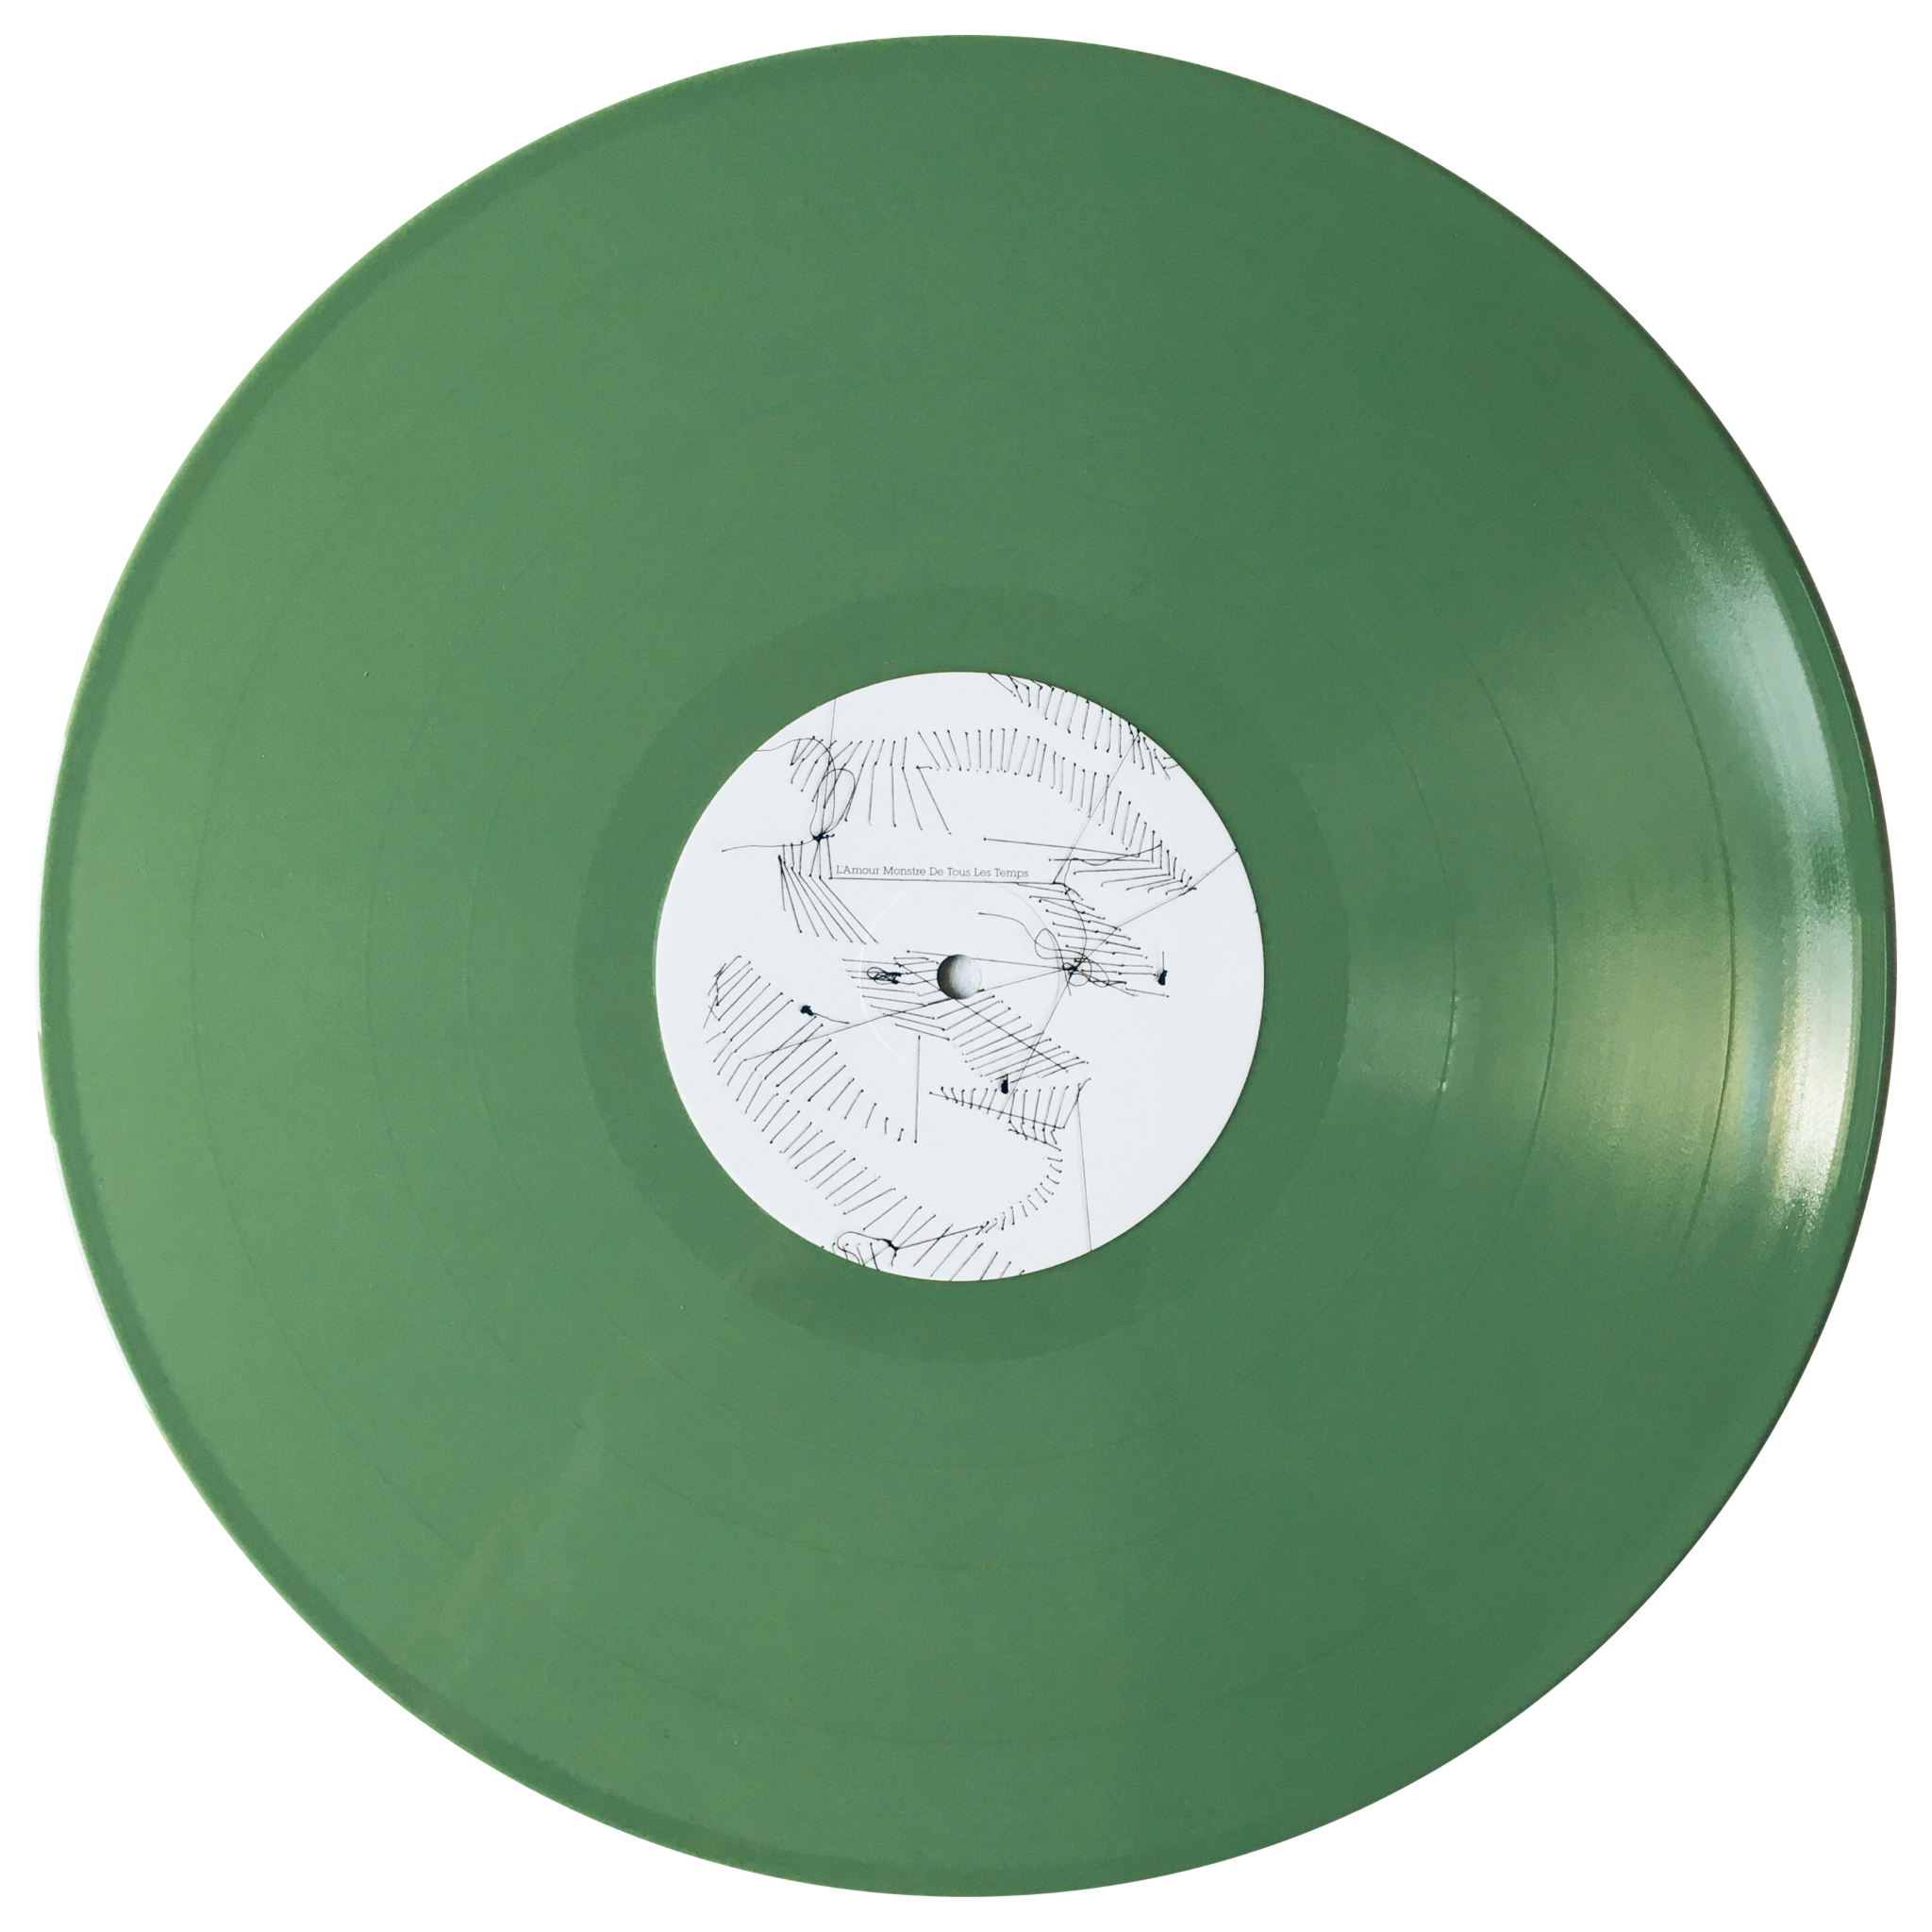 https://www.rawvibesrecords.com/wp-content/uploads/2019/10/Julies_Haircut_In_The_Silence_Electric_Rocket_Recordings_Ltd_Green_vinyl.png